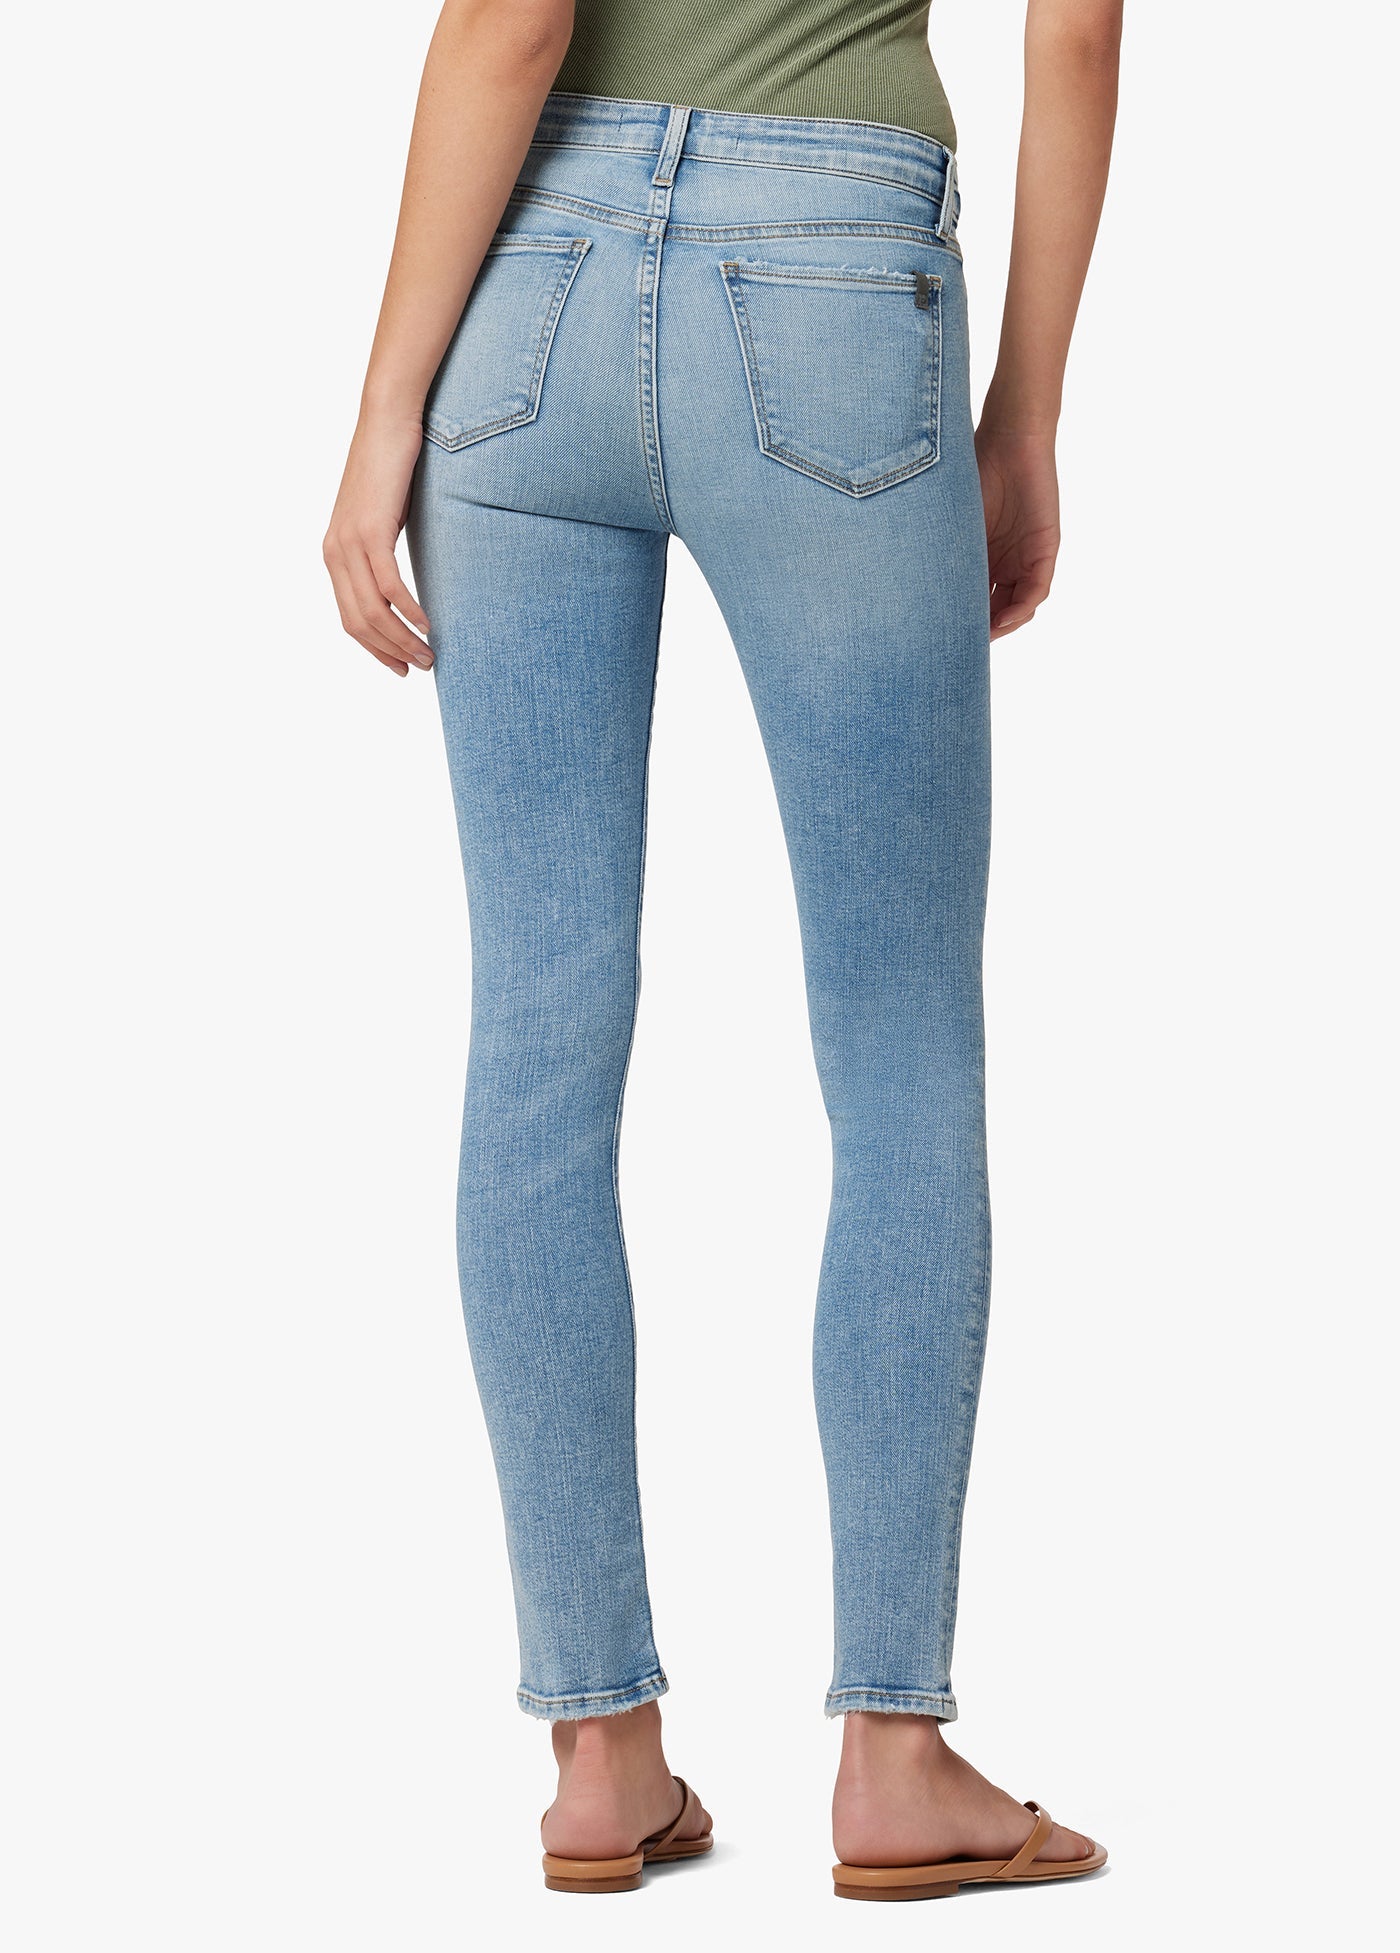 The icon crop cuffed jeans